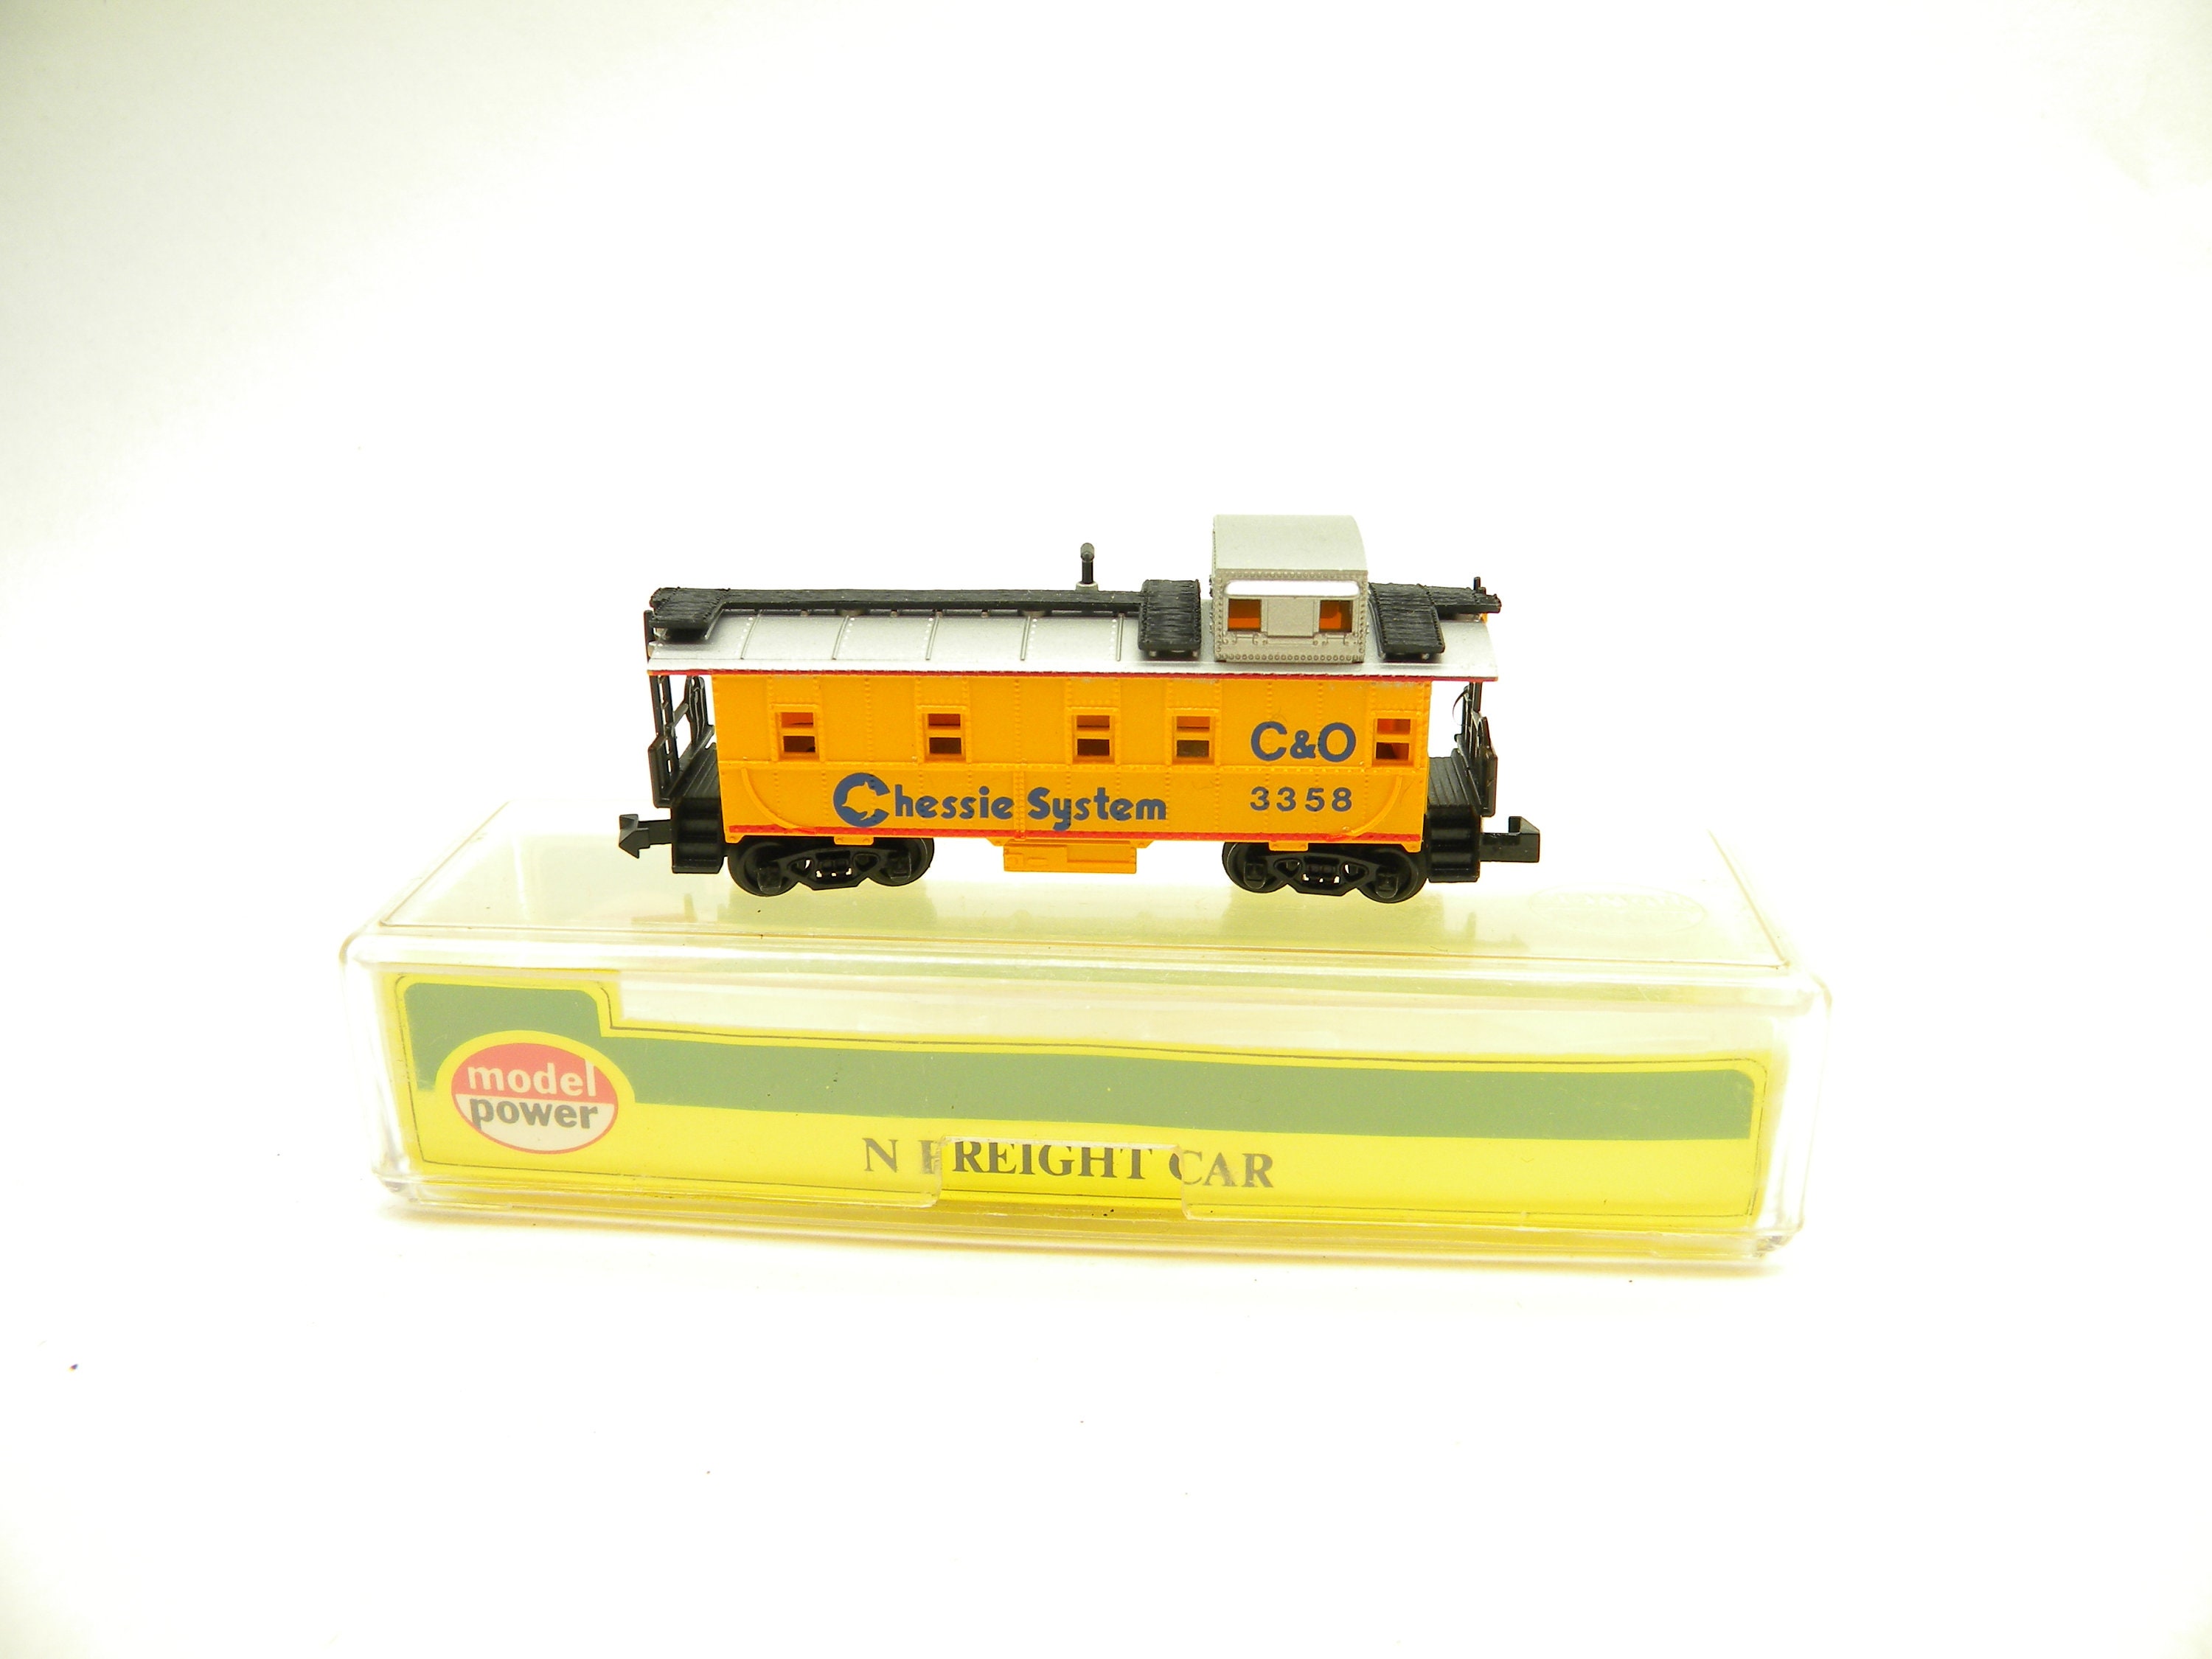 Model Power 3183 Chessie System Offset Cupola Caboose   N Gauge